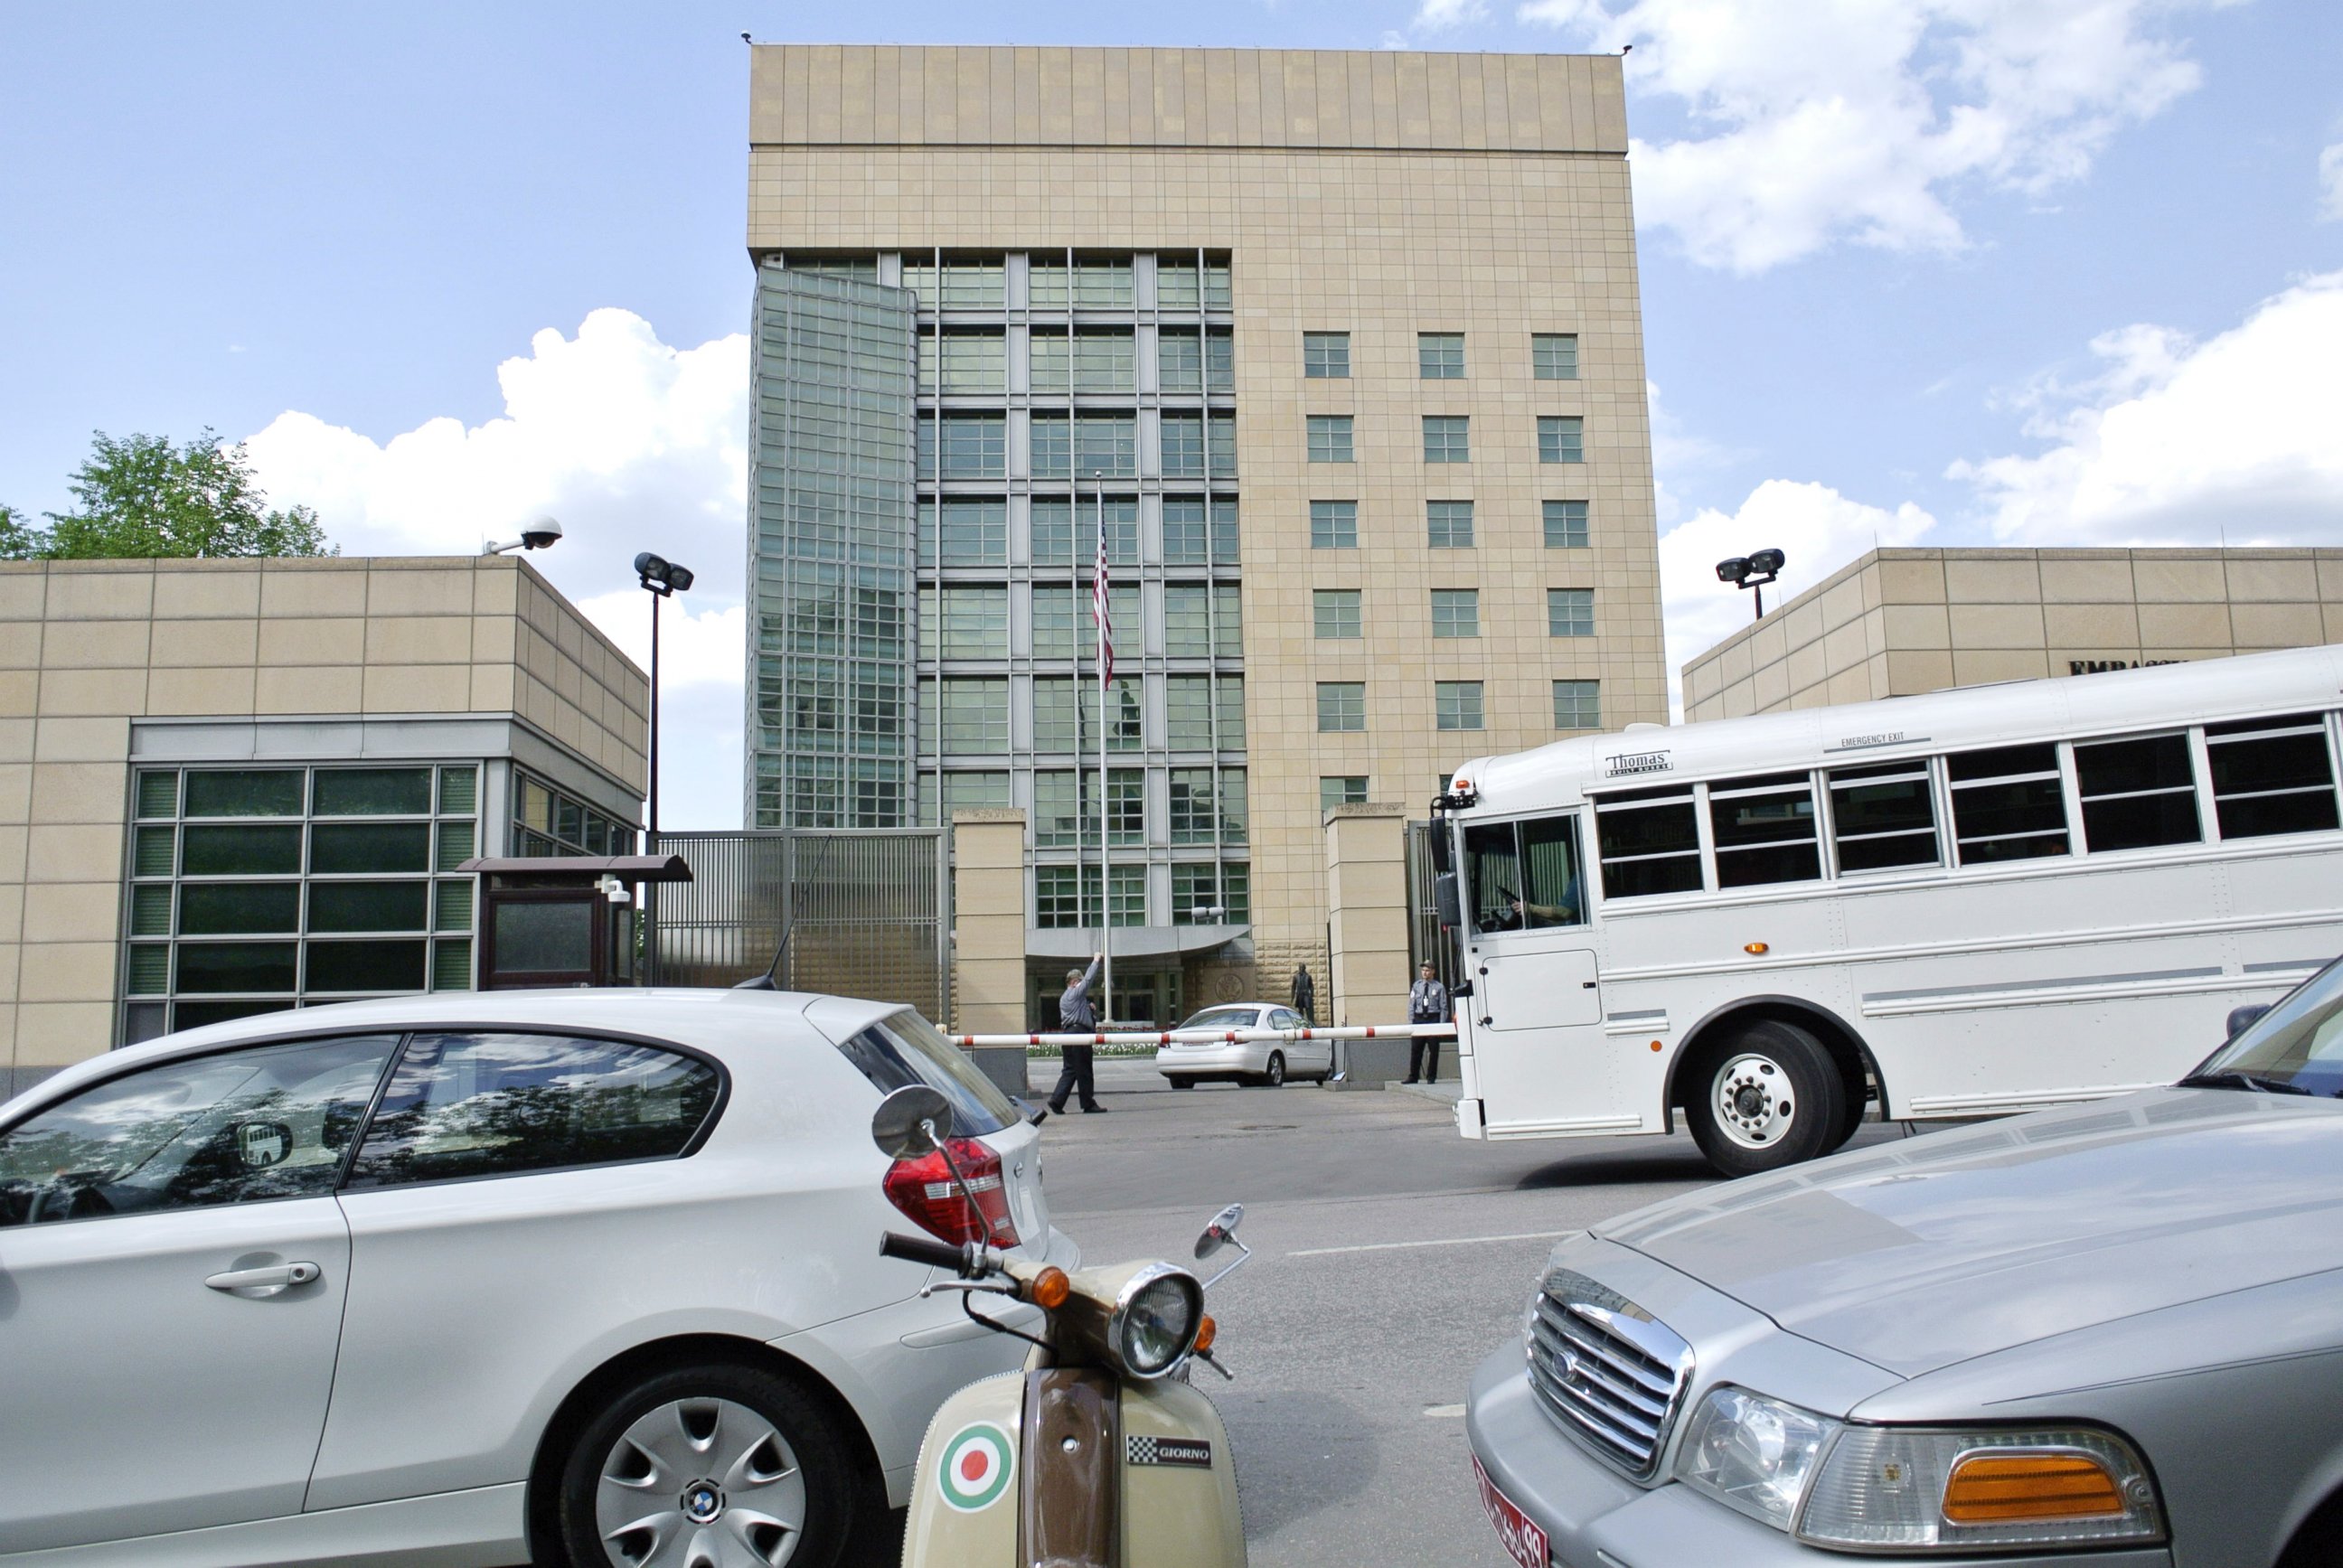 PHOTO: Cars and a bus pass the main building of the U.S. Embassy in downtown Moscow, Russia.